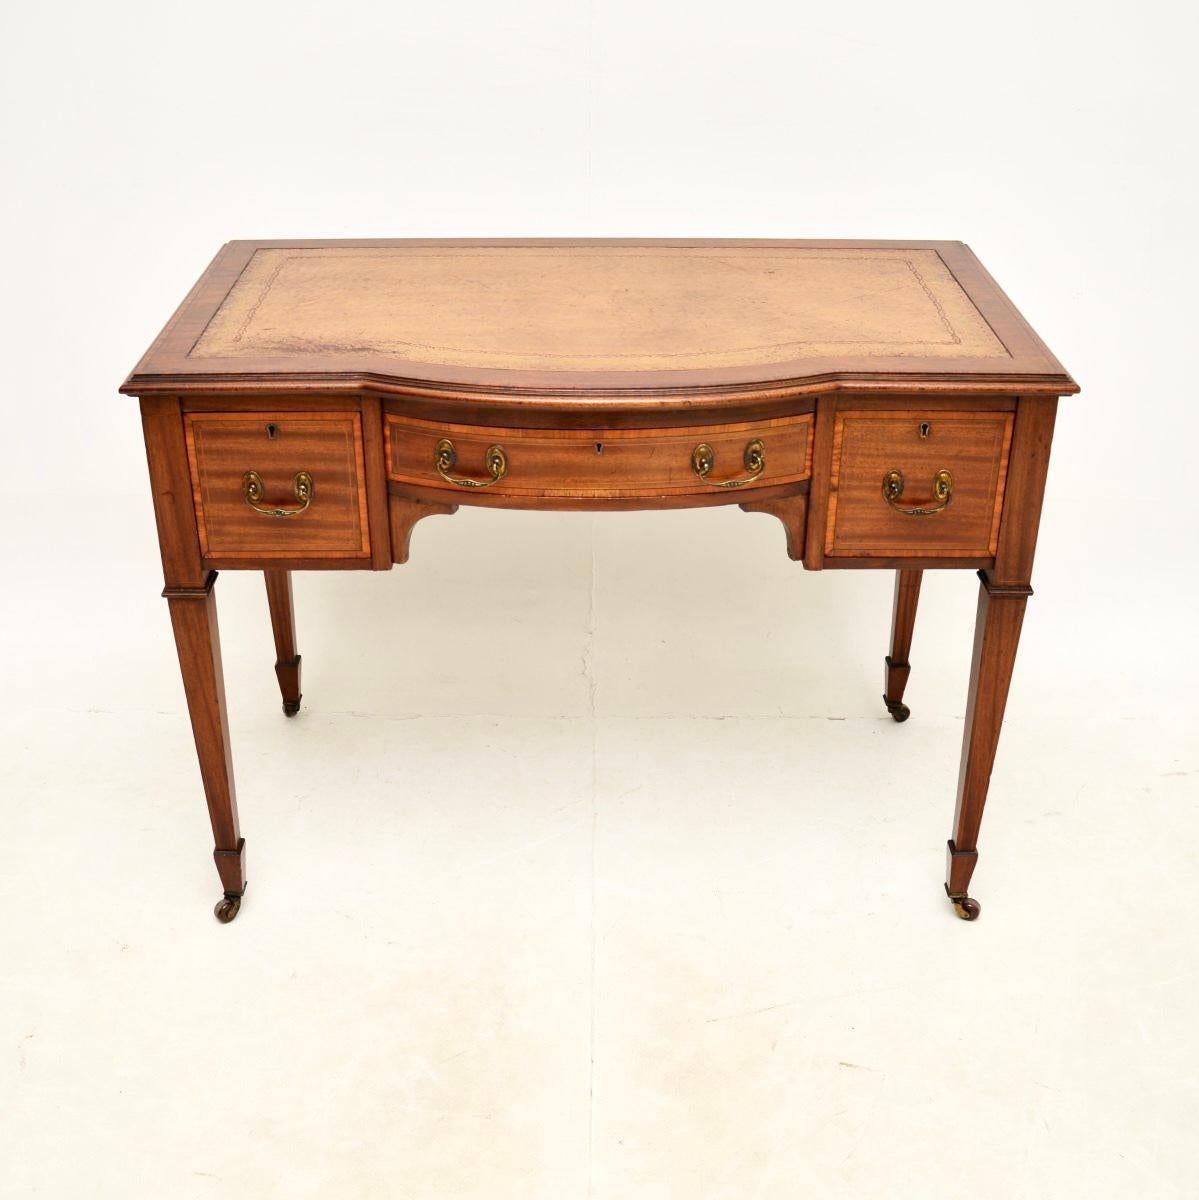 A stunning antique Sheraton Revival Satinwood desk. This dates from around the 1890-1910 period, and it was made in England.

The quality is fantastic, this has beautiful brass handles, fine hand cut dovetailed drawers and it sits on original